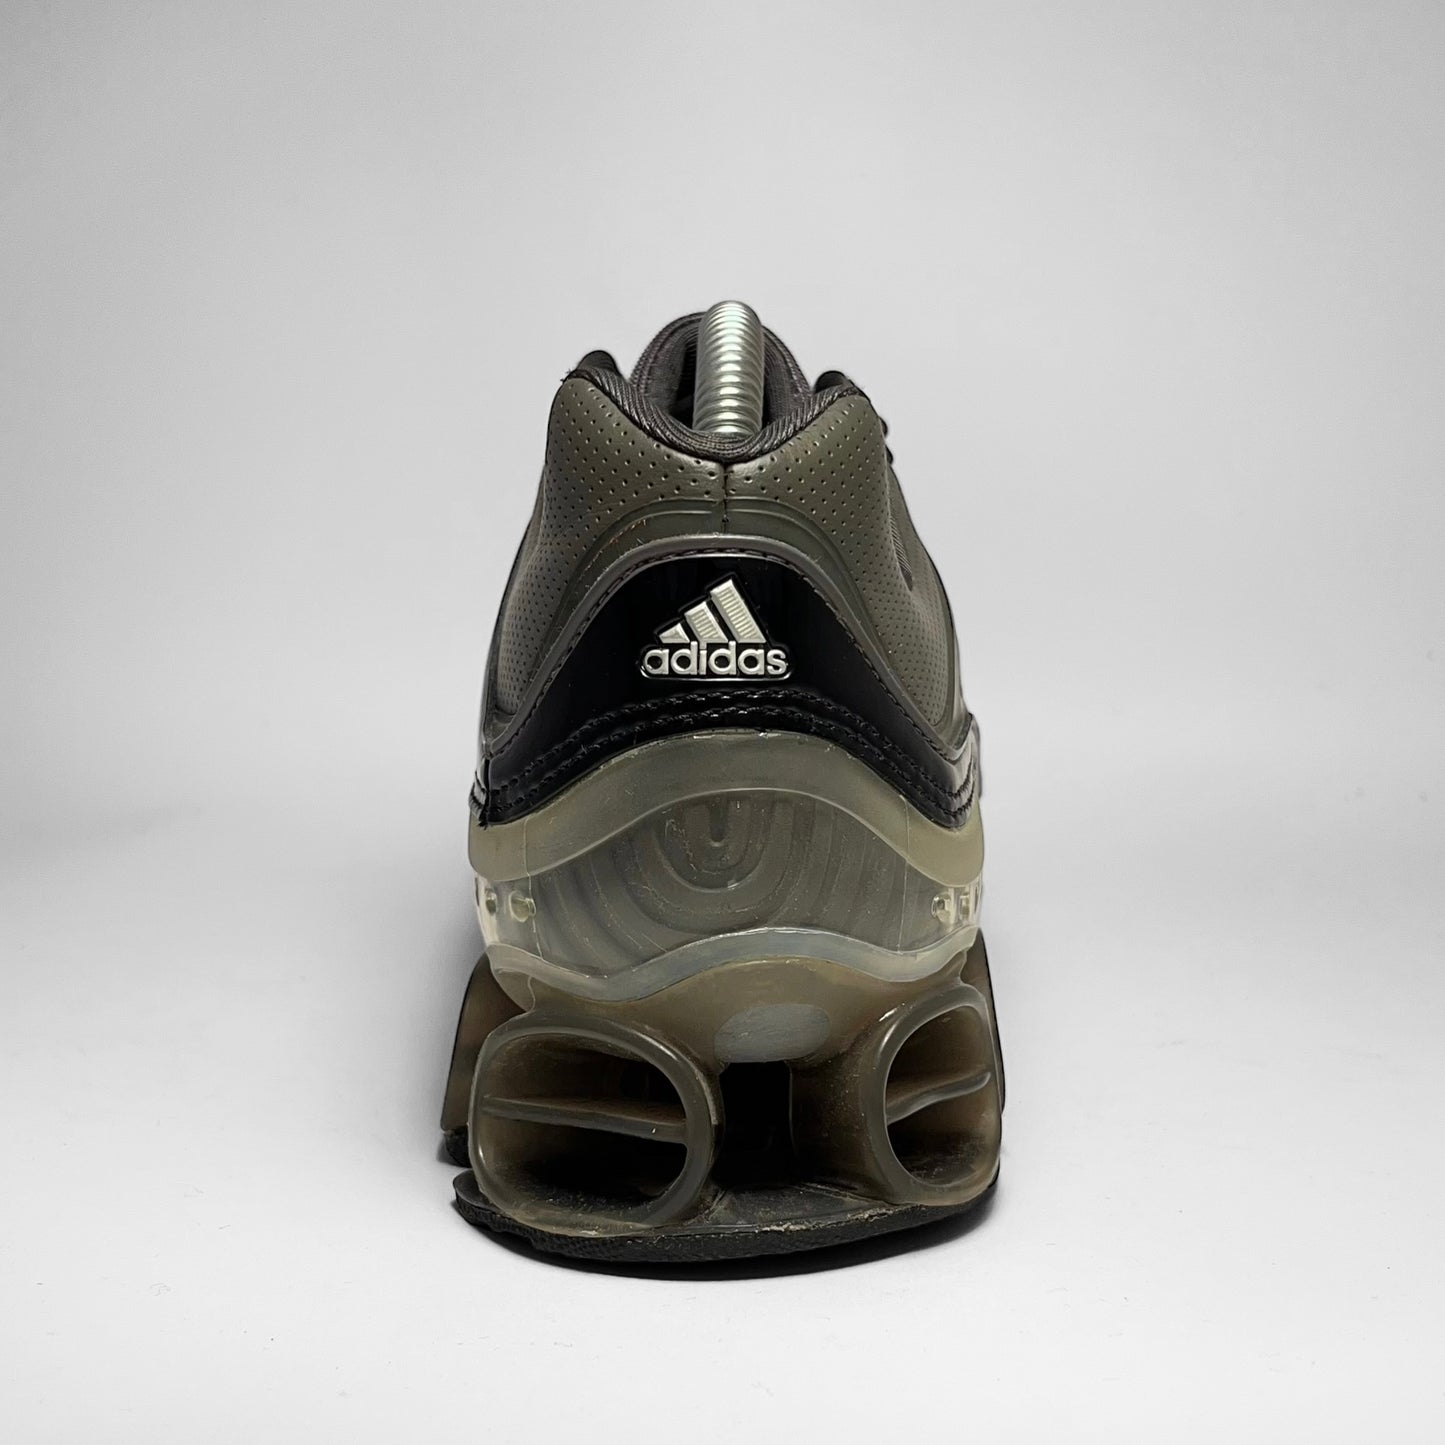 Adidas Bounce Leather ‘Sample’ (2000s)